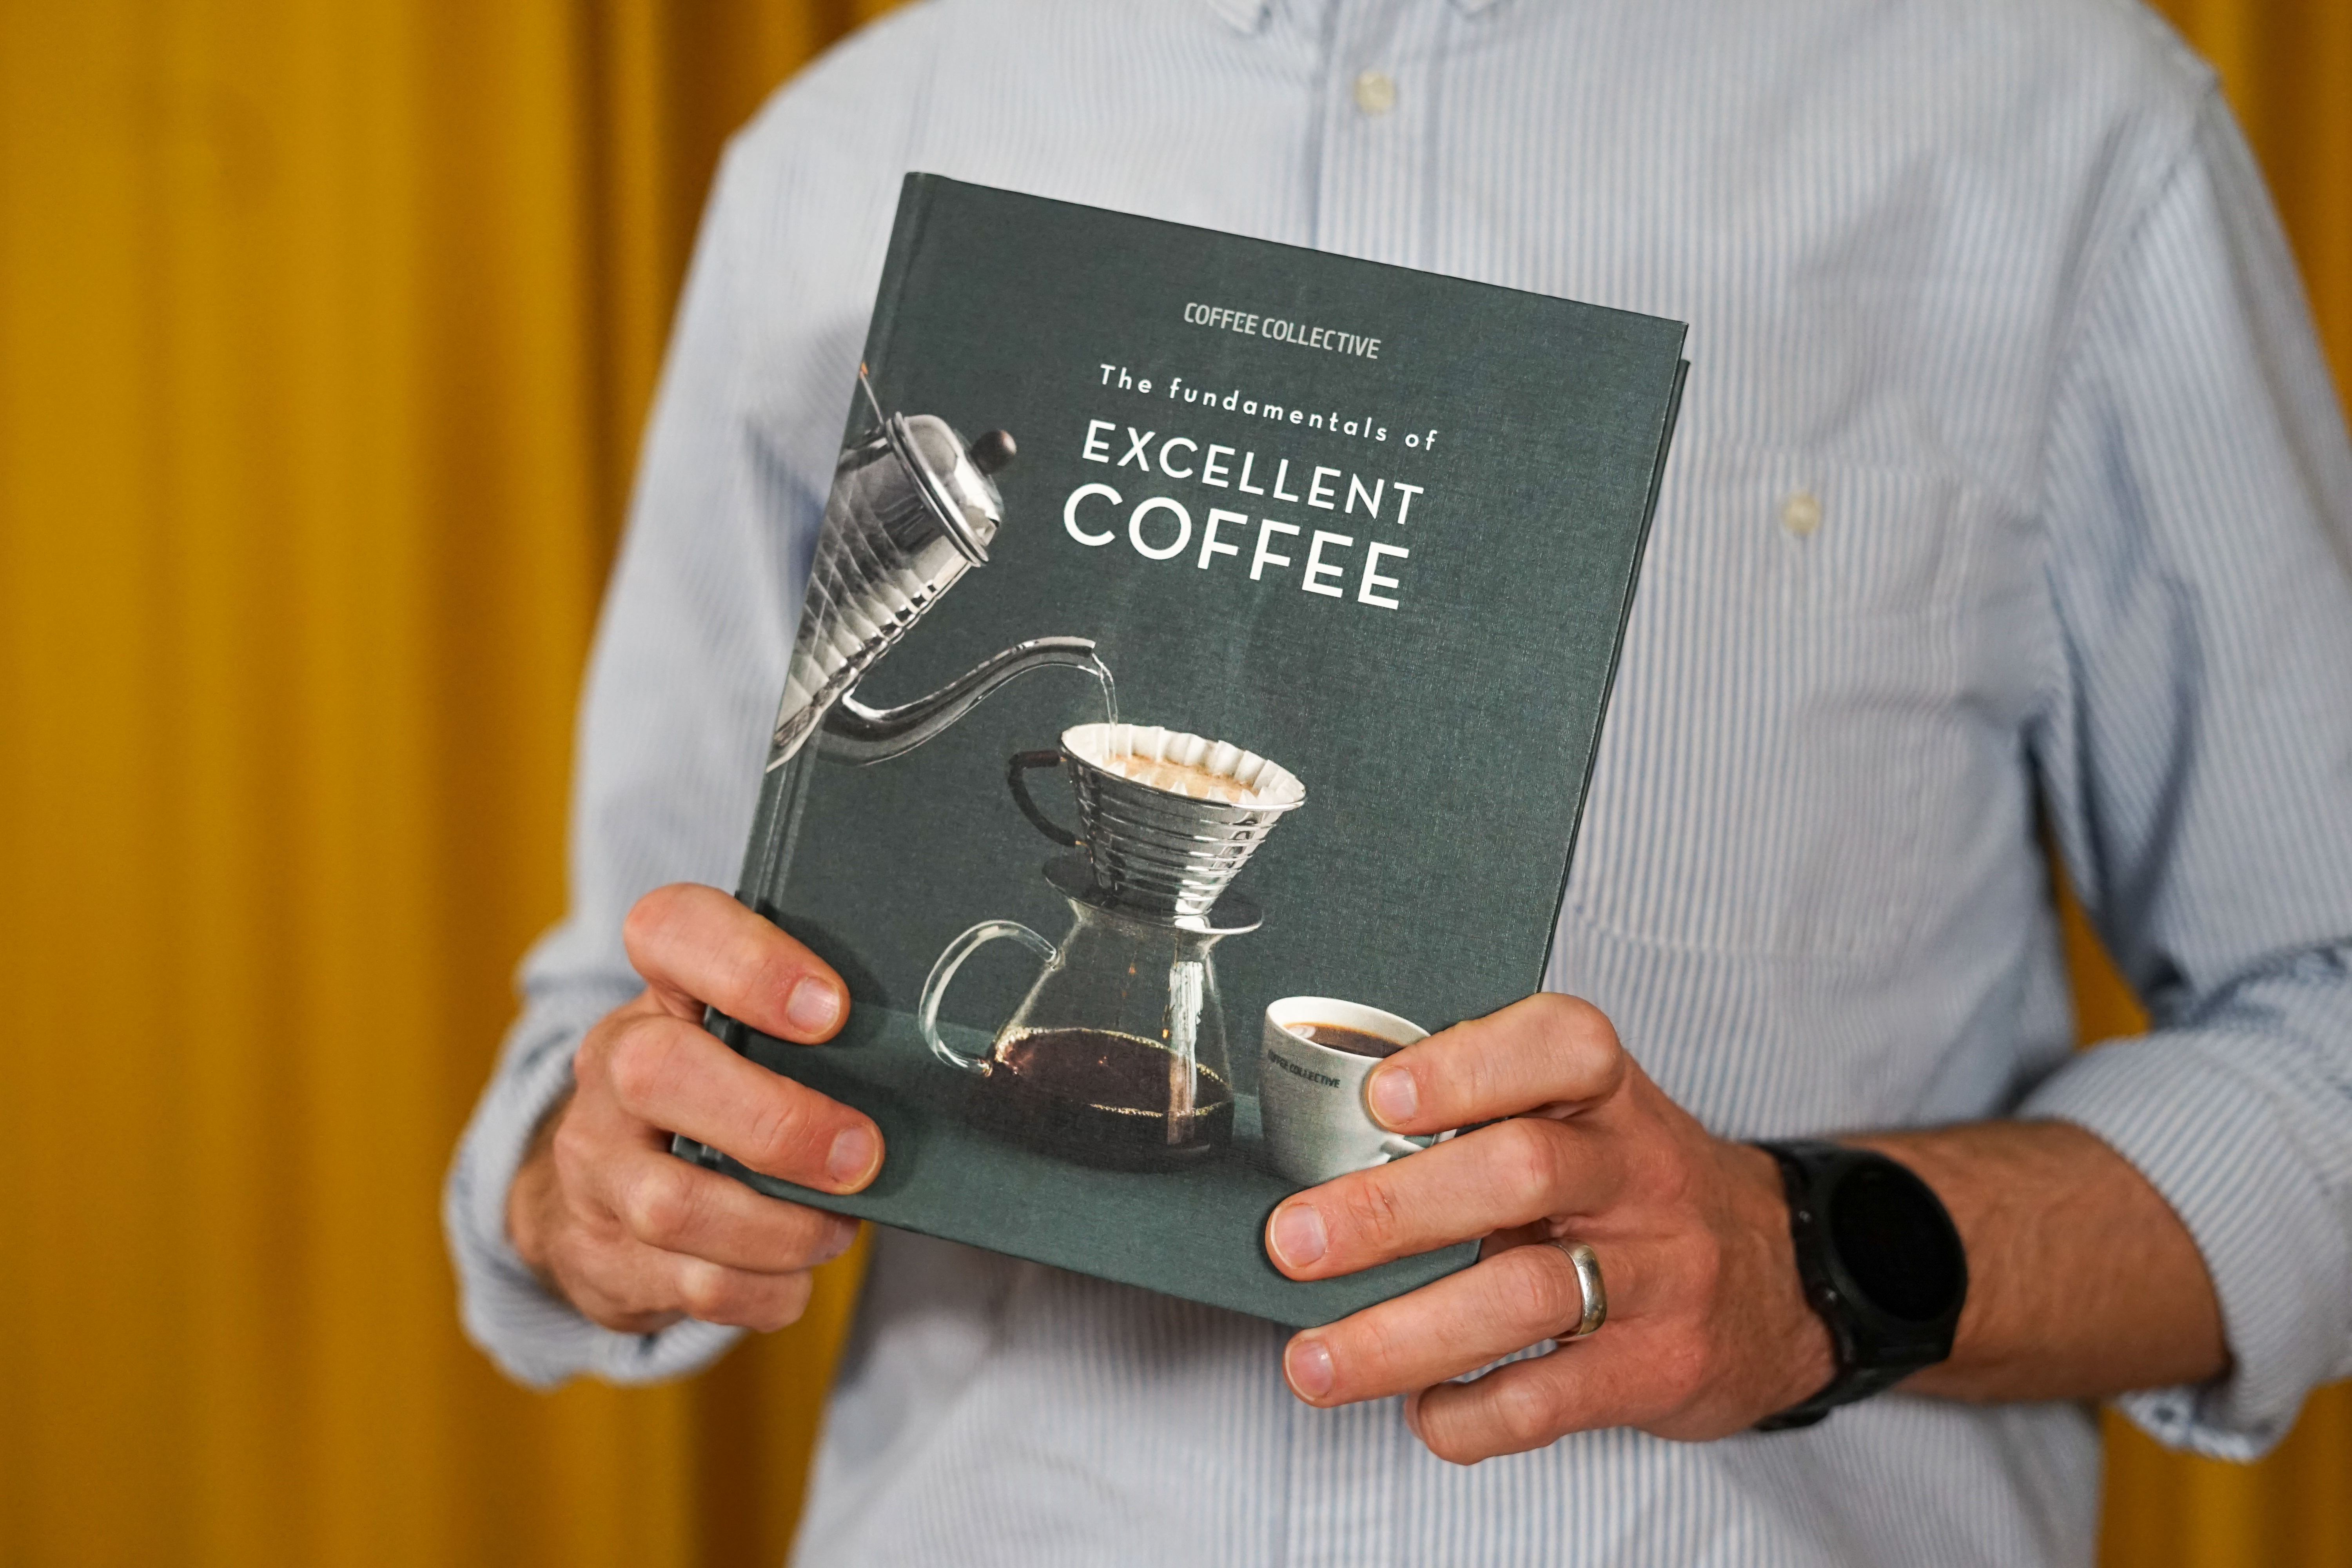 The Fundamentals of Excellent Coffee 